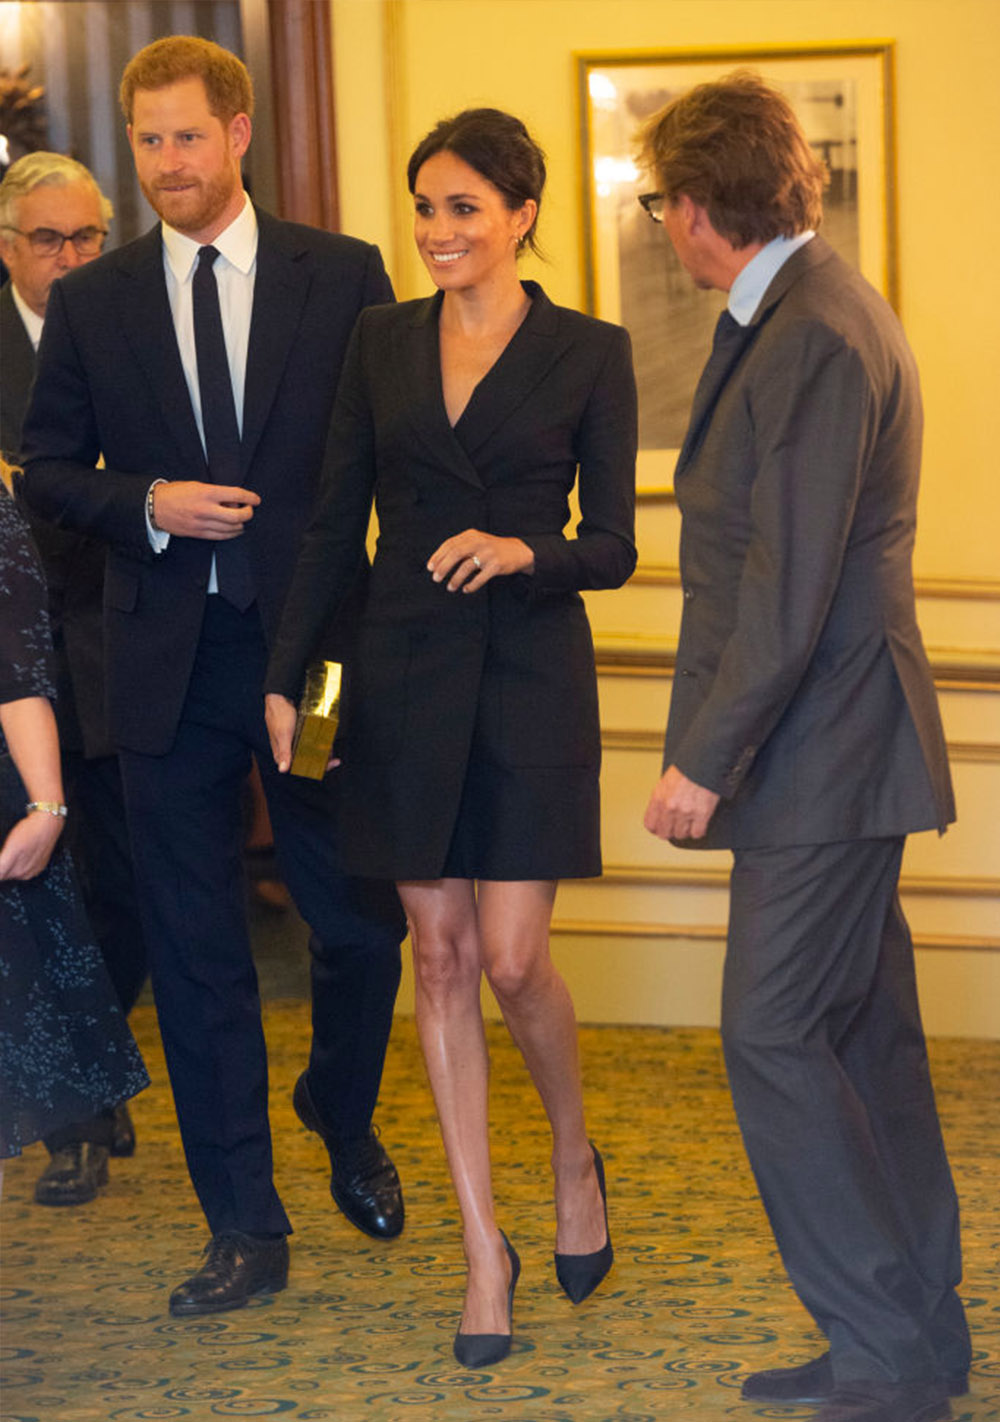 August 29, 2018: Back in black, Meghan, Duchess of Sussex, accompanies husband Prince Harry, Duke of Sussex to a performance of ‘Hamilton’ wearing an oh-so-sophisticated Judith & Charles tuxedo dress *swoon* with Stuart Weitzman pumps. Another one knocked out of the park from the Duchess!